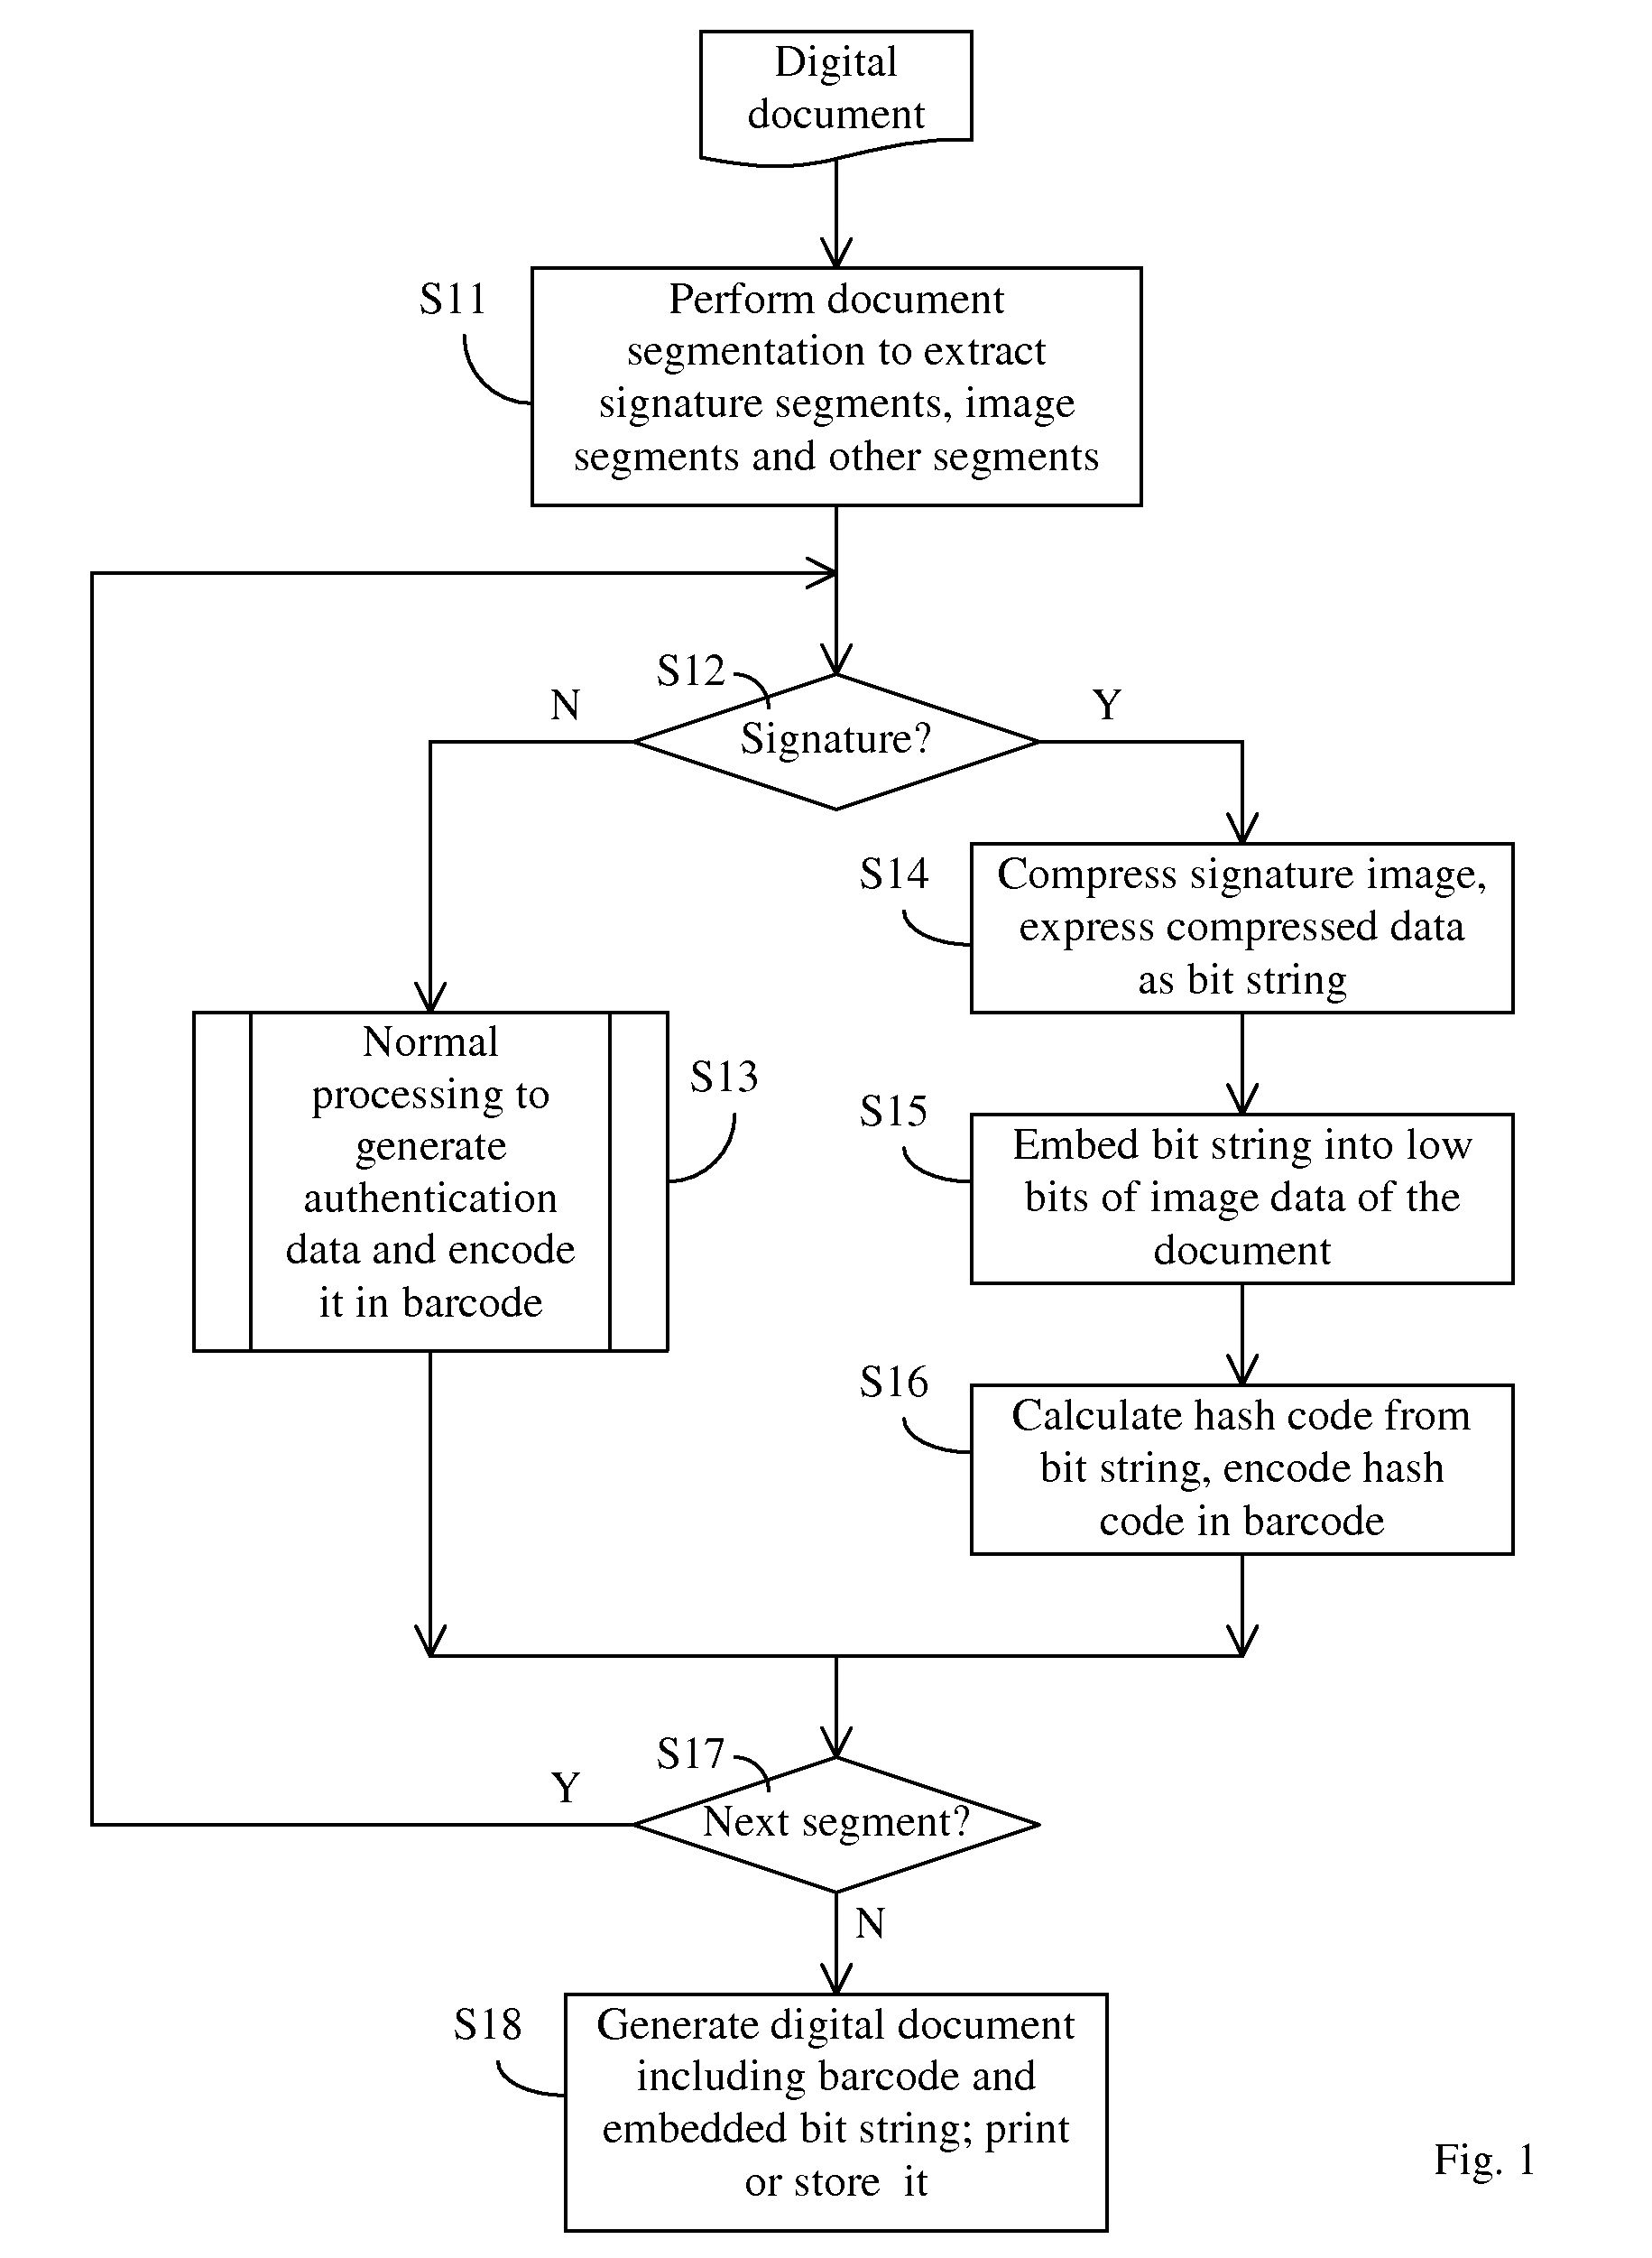 Method of self-authenticating a document while preserving critical content in authentication data